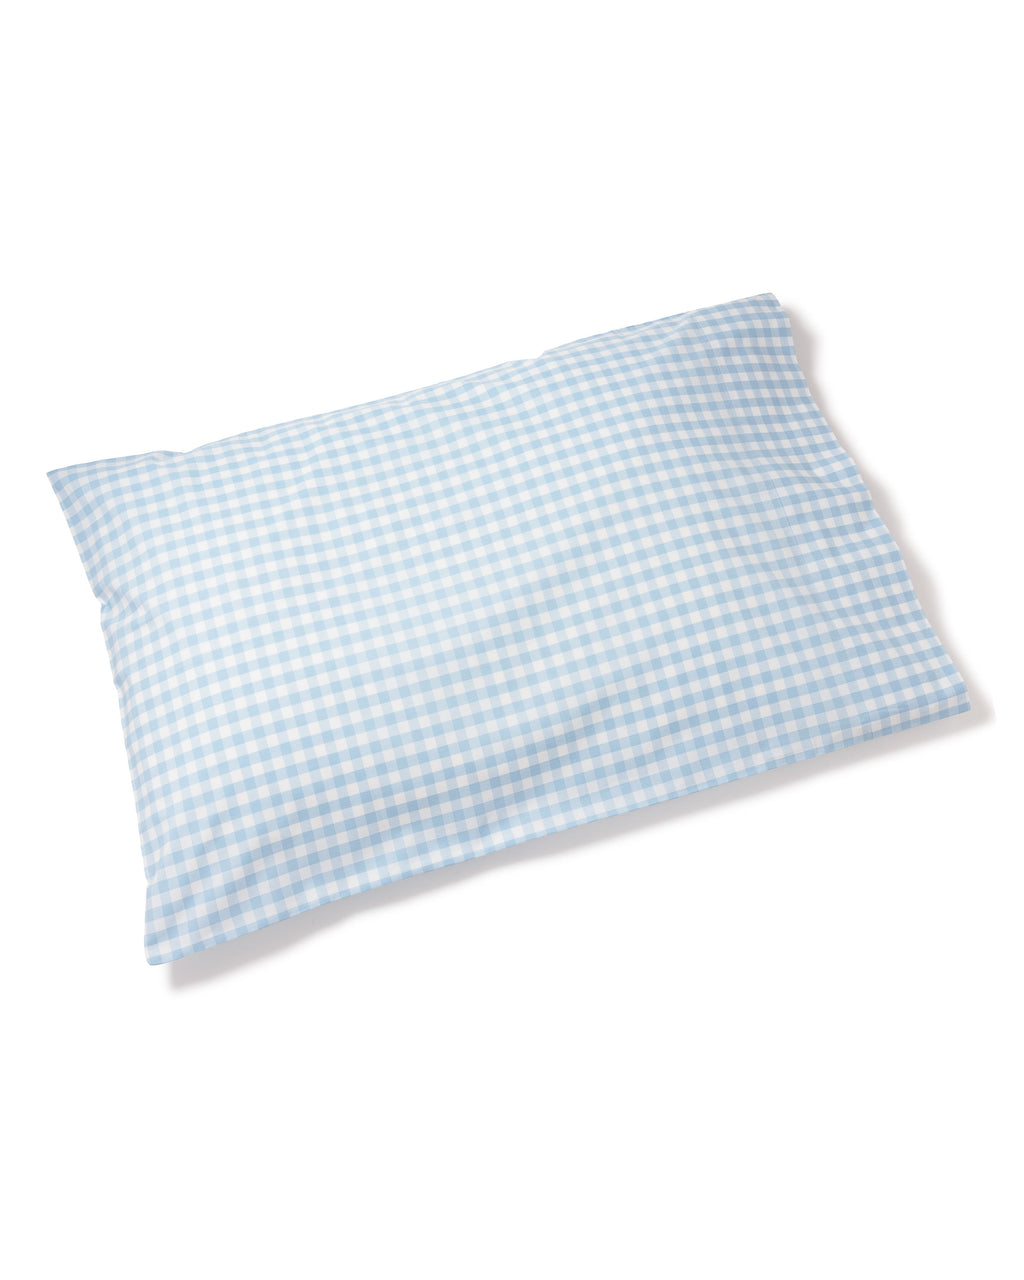 Luxe Premium Cotton Navy Gingham Bed Sheets – Petite Plume